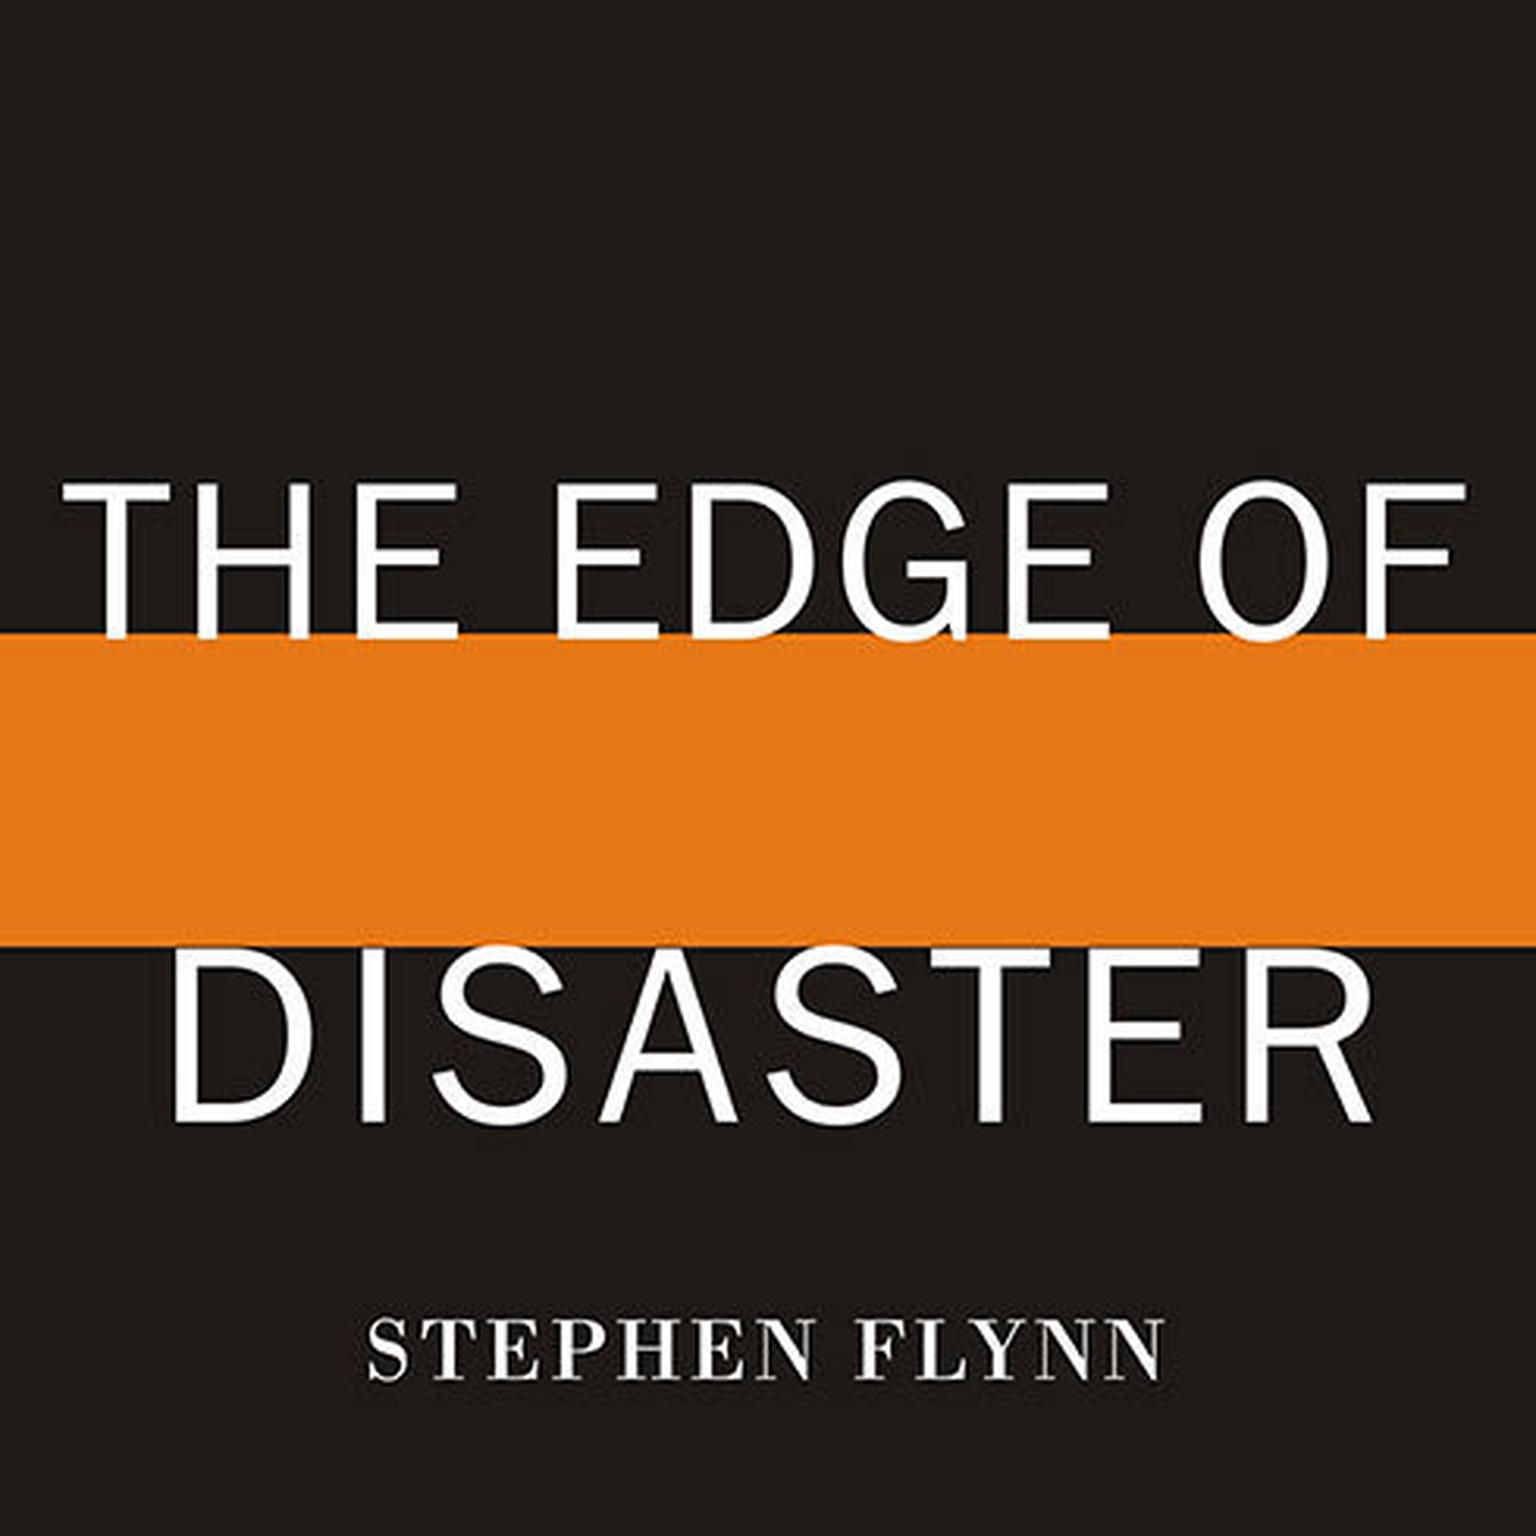 The Edge of Disaster: Rebuilding a Resilient Nation Audiobook, by Stephen Flynn